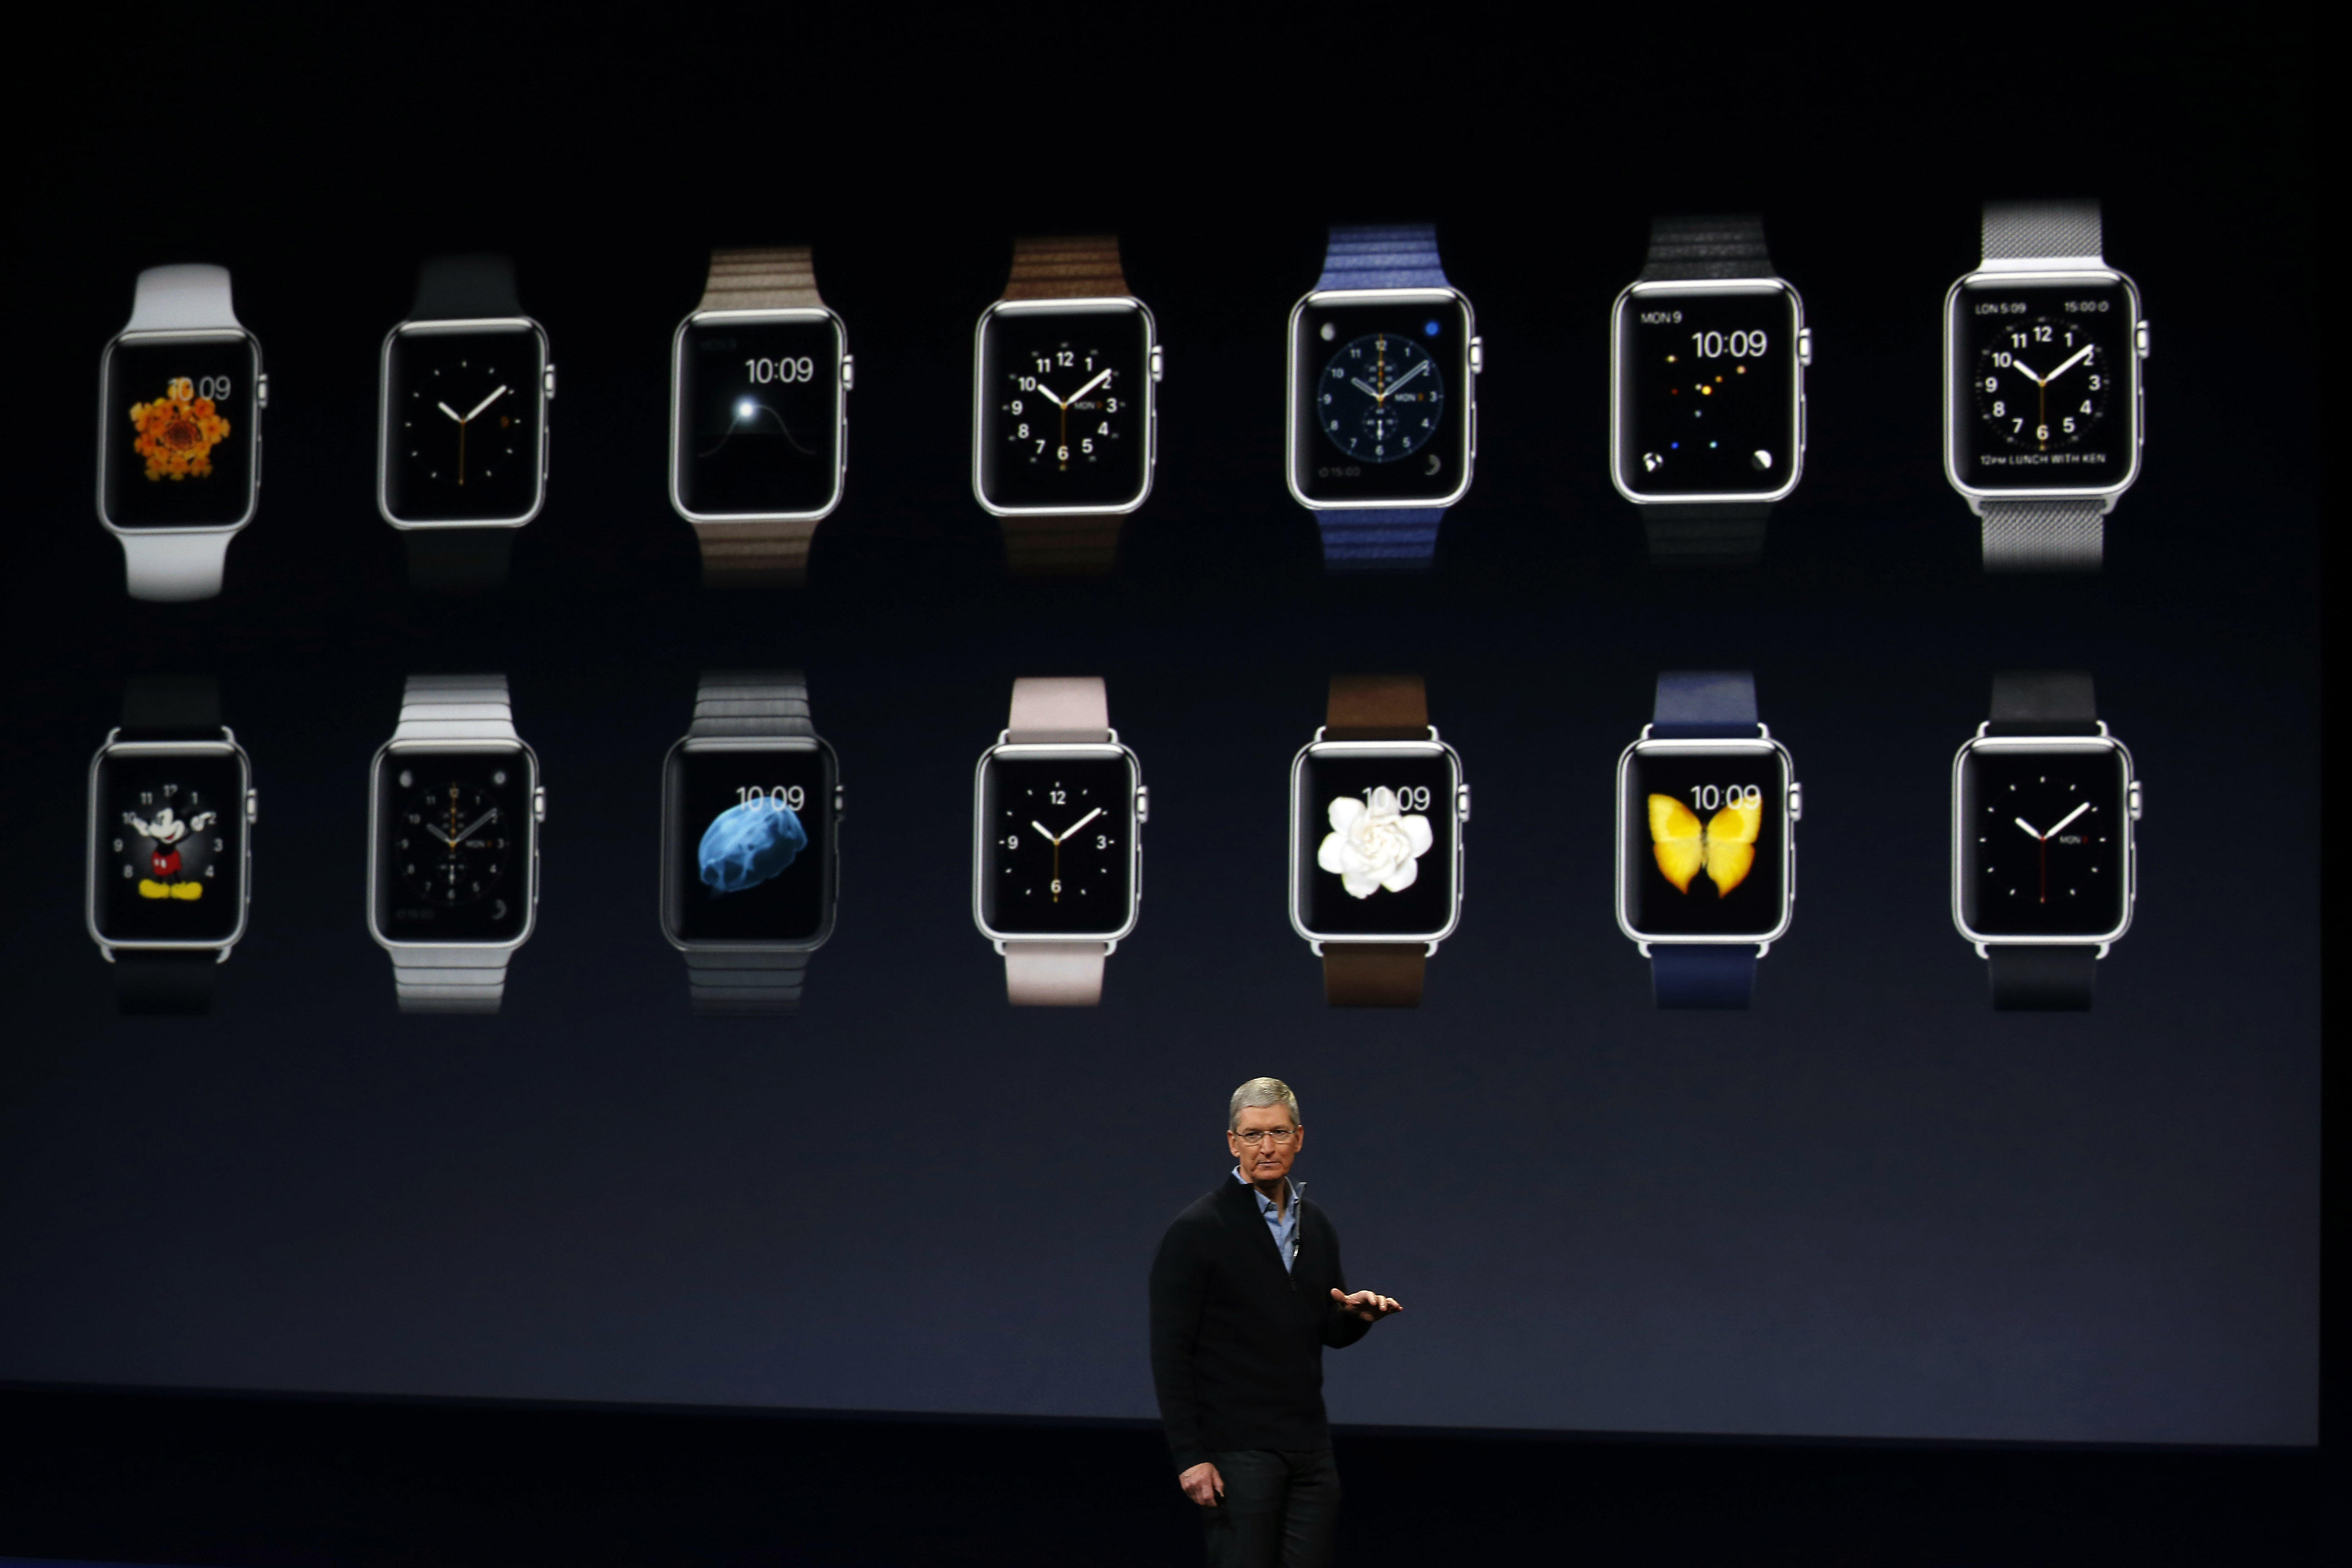 Apple Debuts Apple Watch At Event